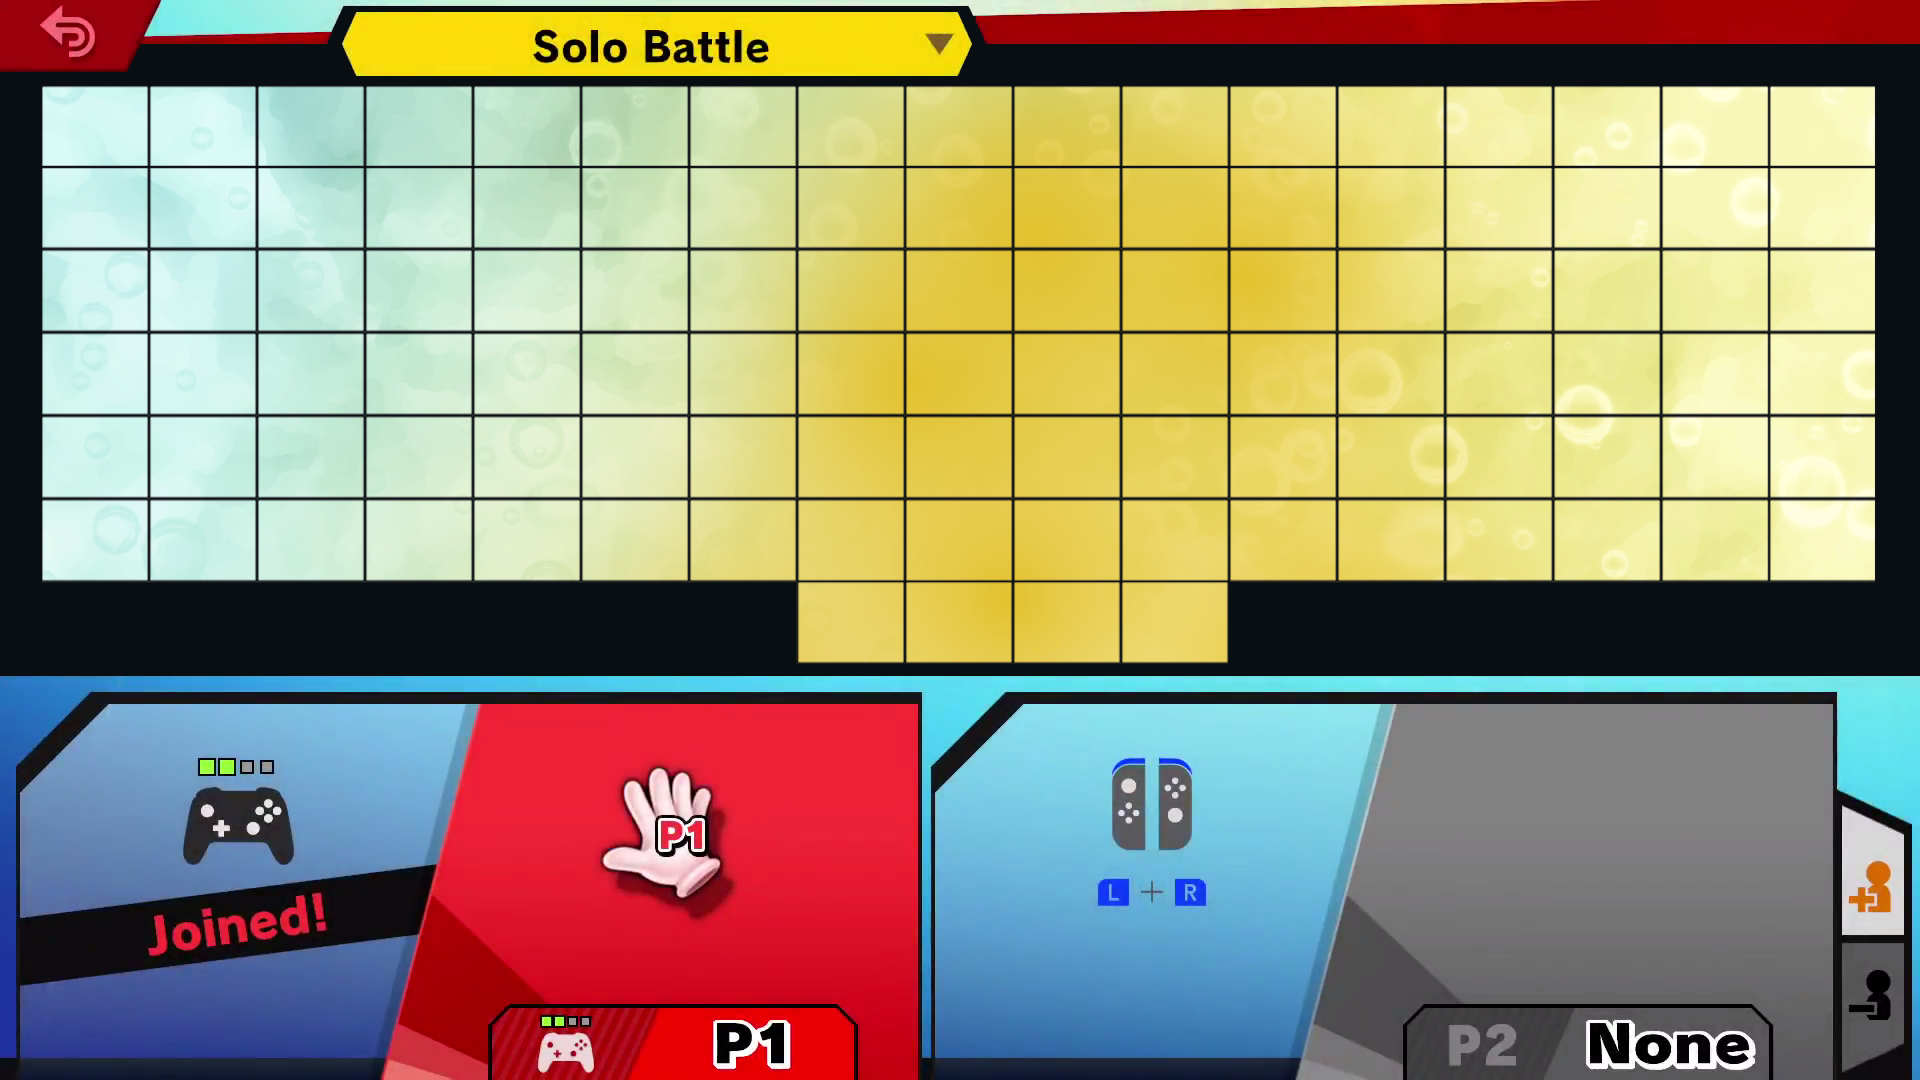 Super Smash Bros. Ultimate Roster Template by BrandonTheBronyPony on